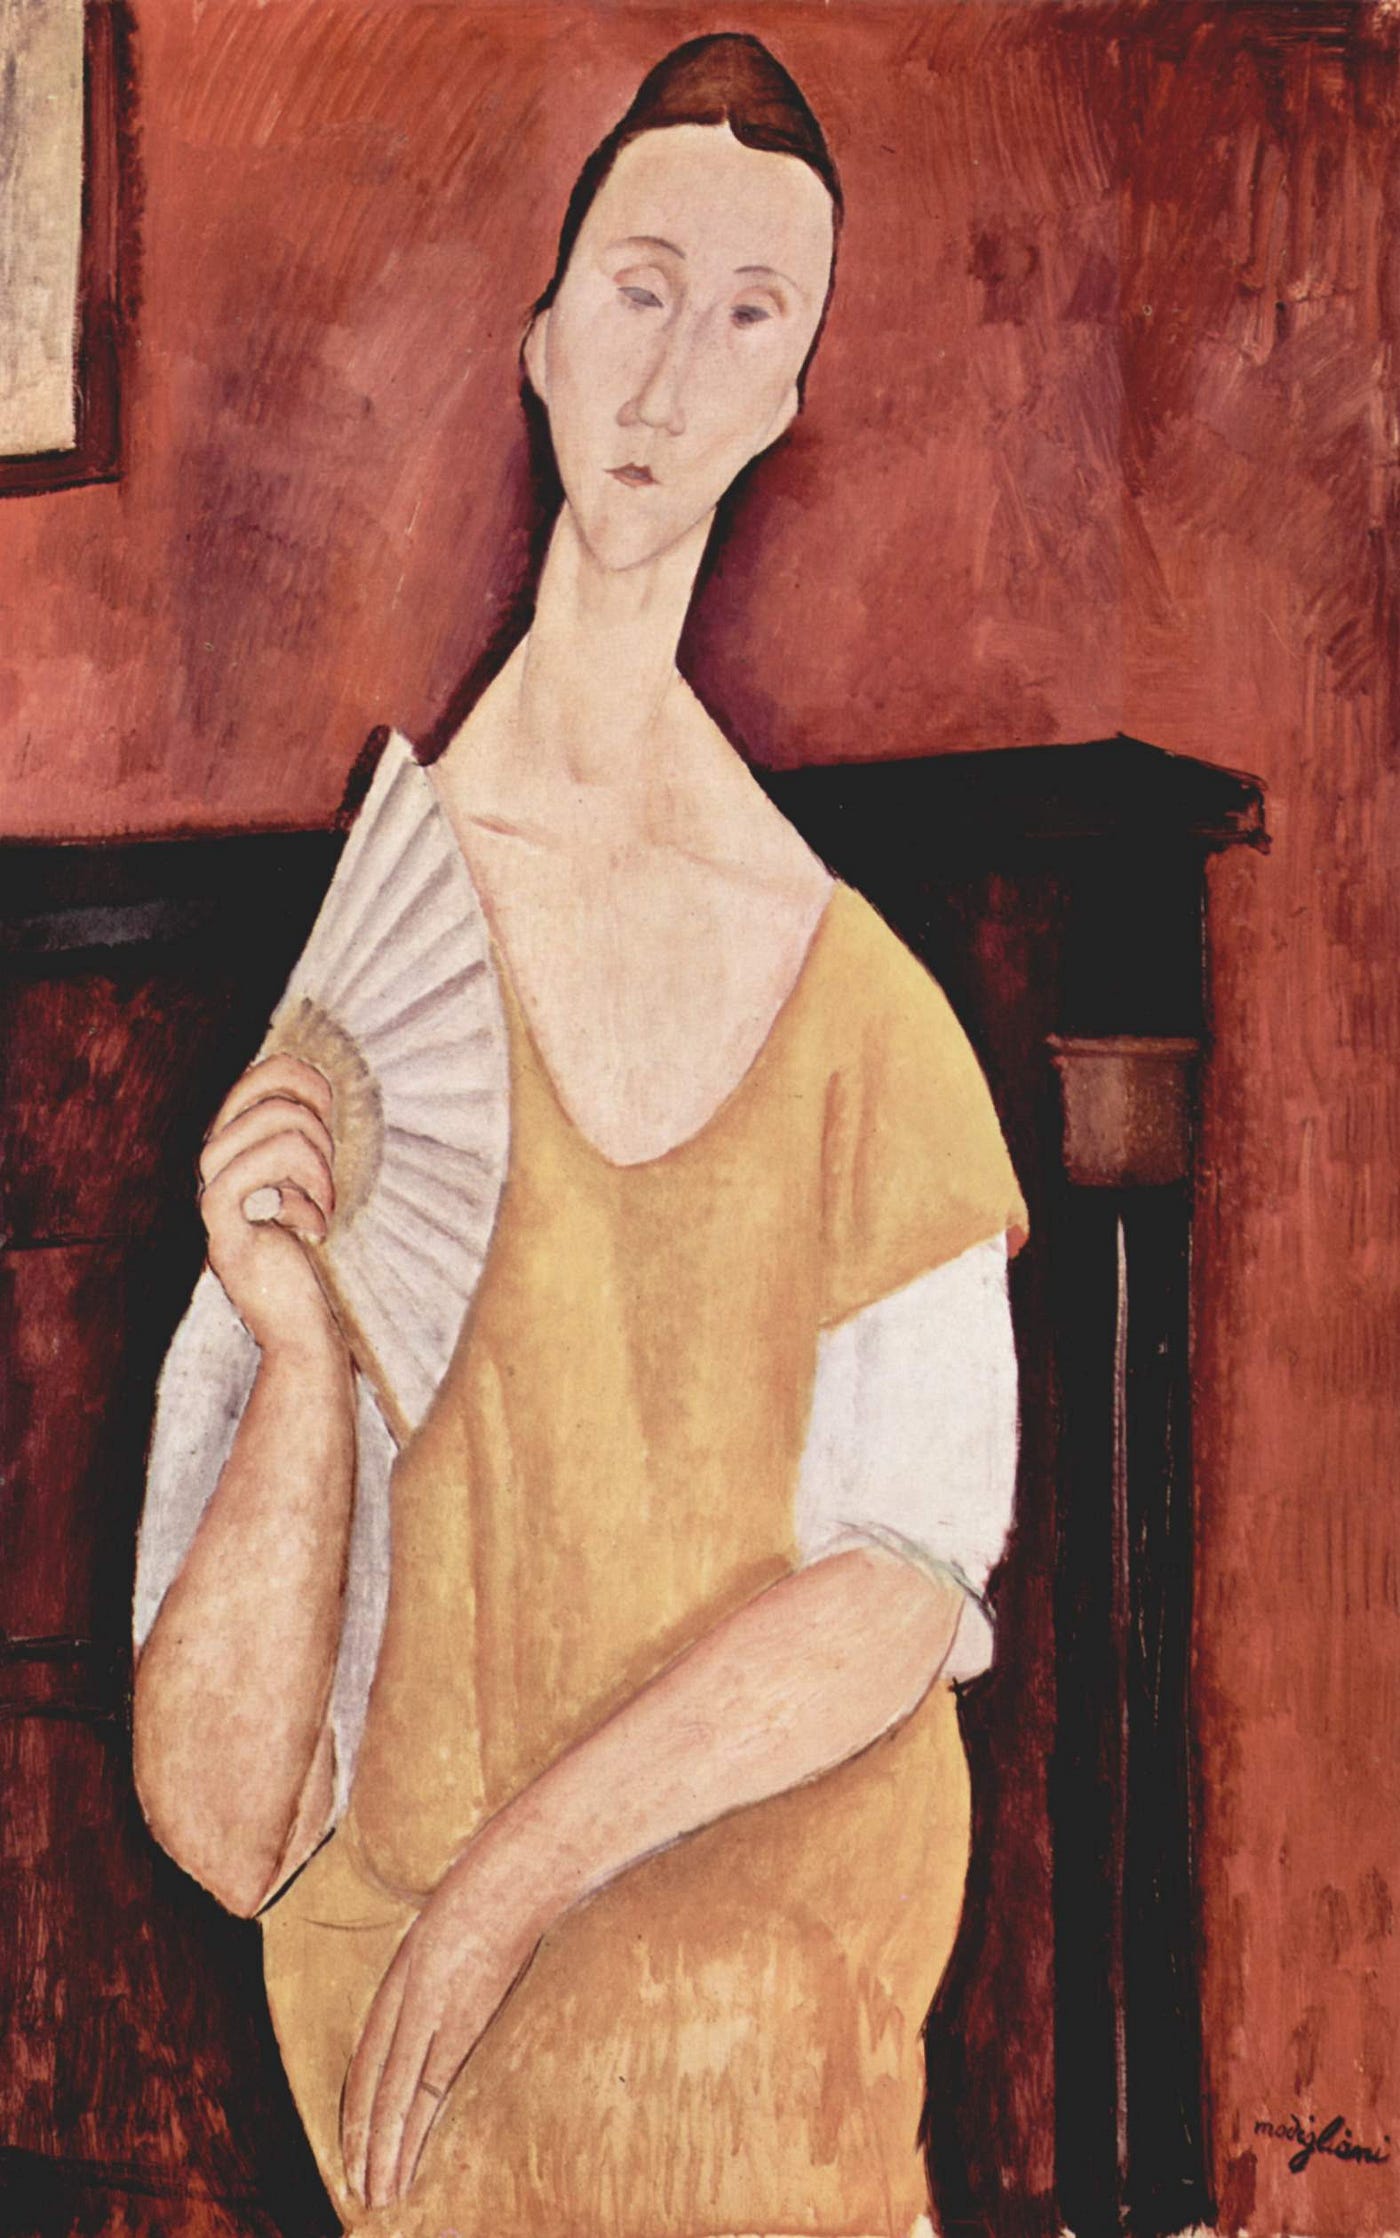 Woman With a Fan: A Painting by Amedeo Modigliani, by John Welford, The  World's Great Art